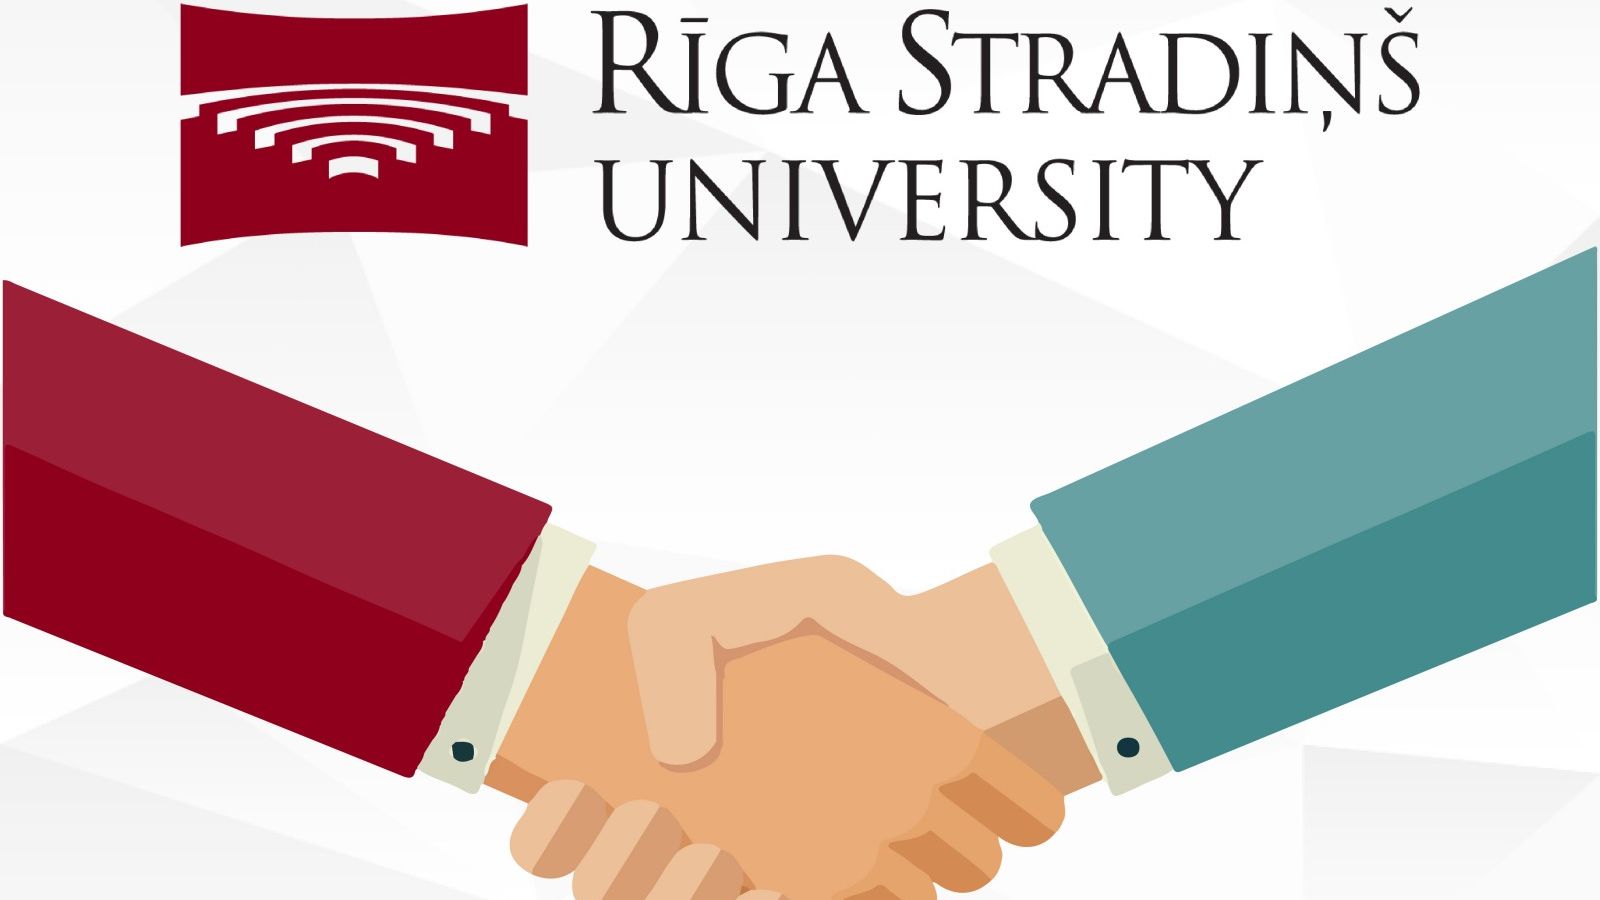 Translation company LMI Translations - In 2020, LMI Translations was awarded a contract with Rīga Stradiņš University for the provision of translation services